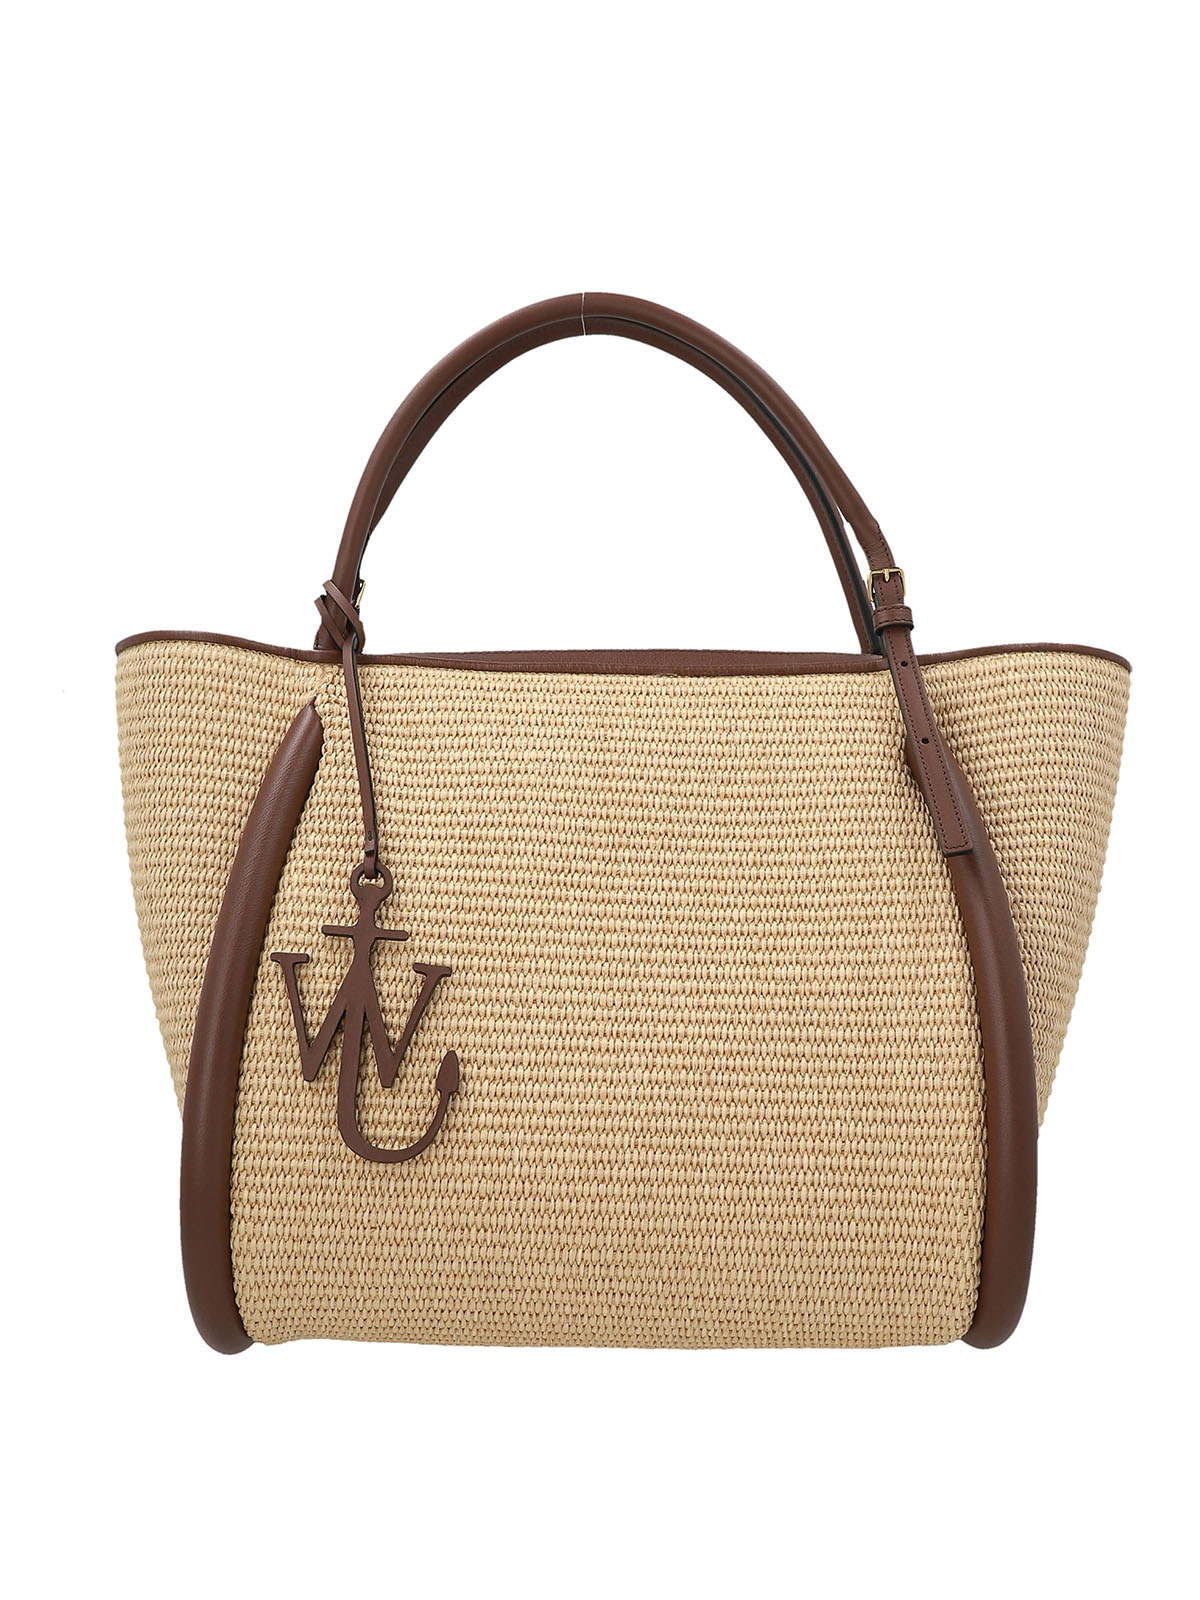 Jw Anderson The Bumper 31 Shopping Bag In Beige